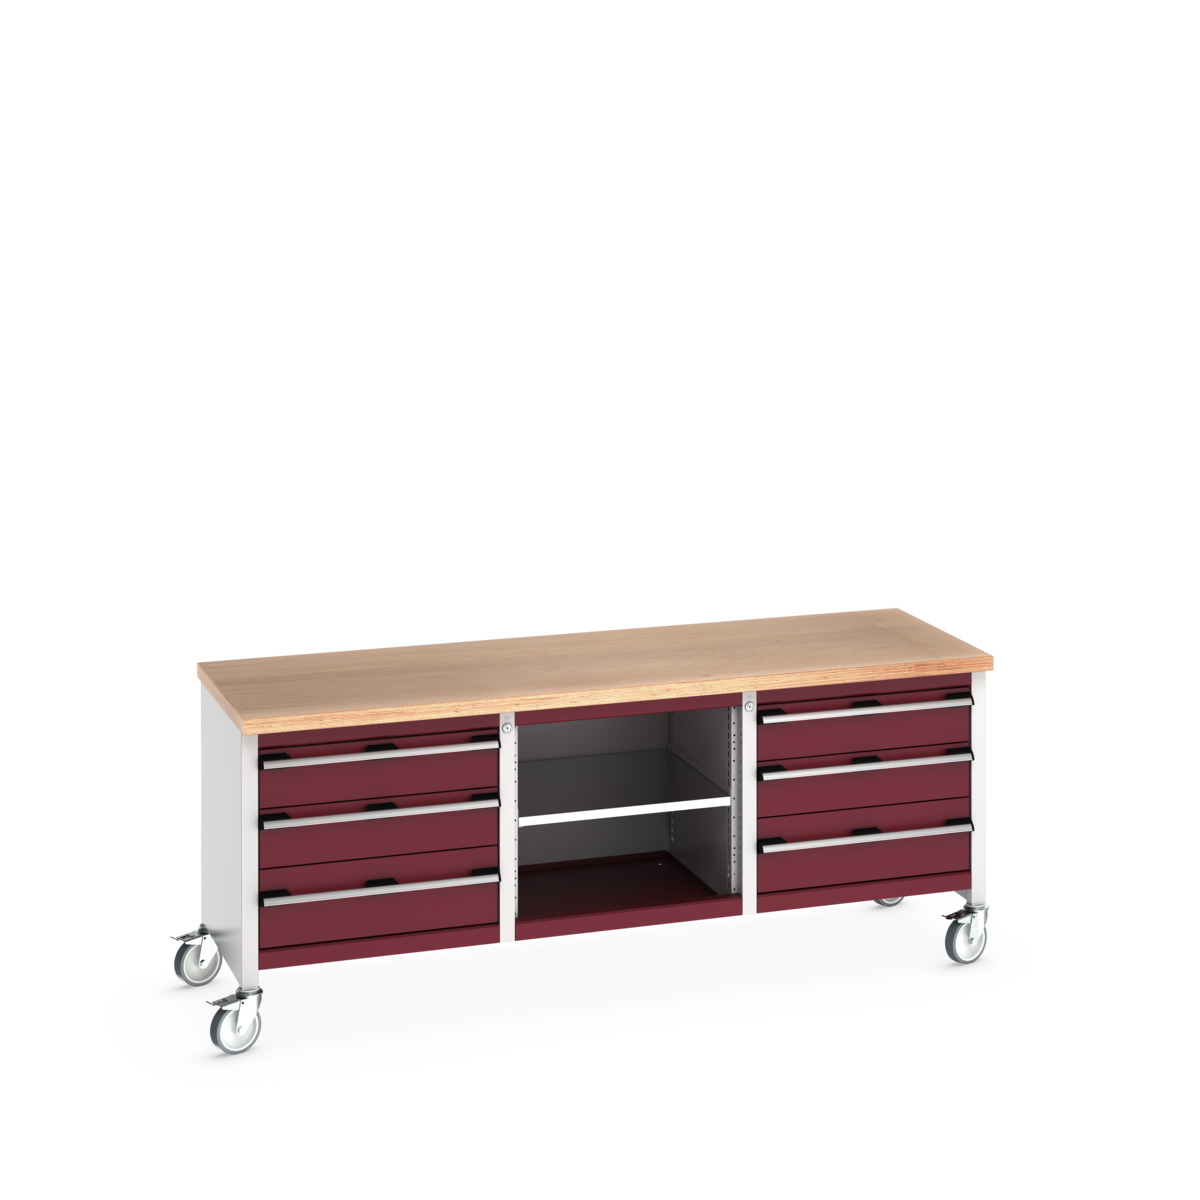 41002130.24V - cubio mobile storage bench (mpx)